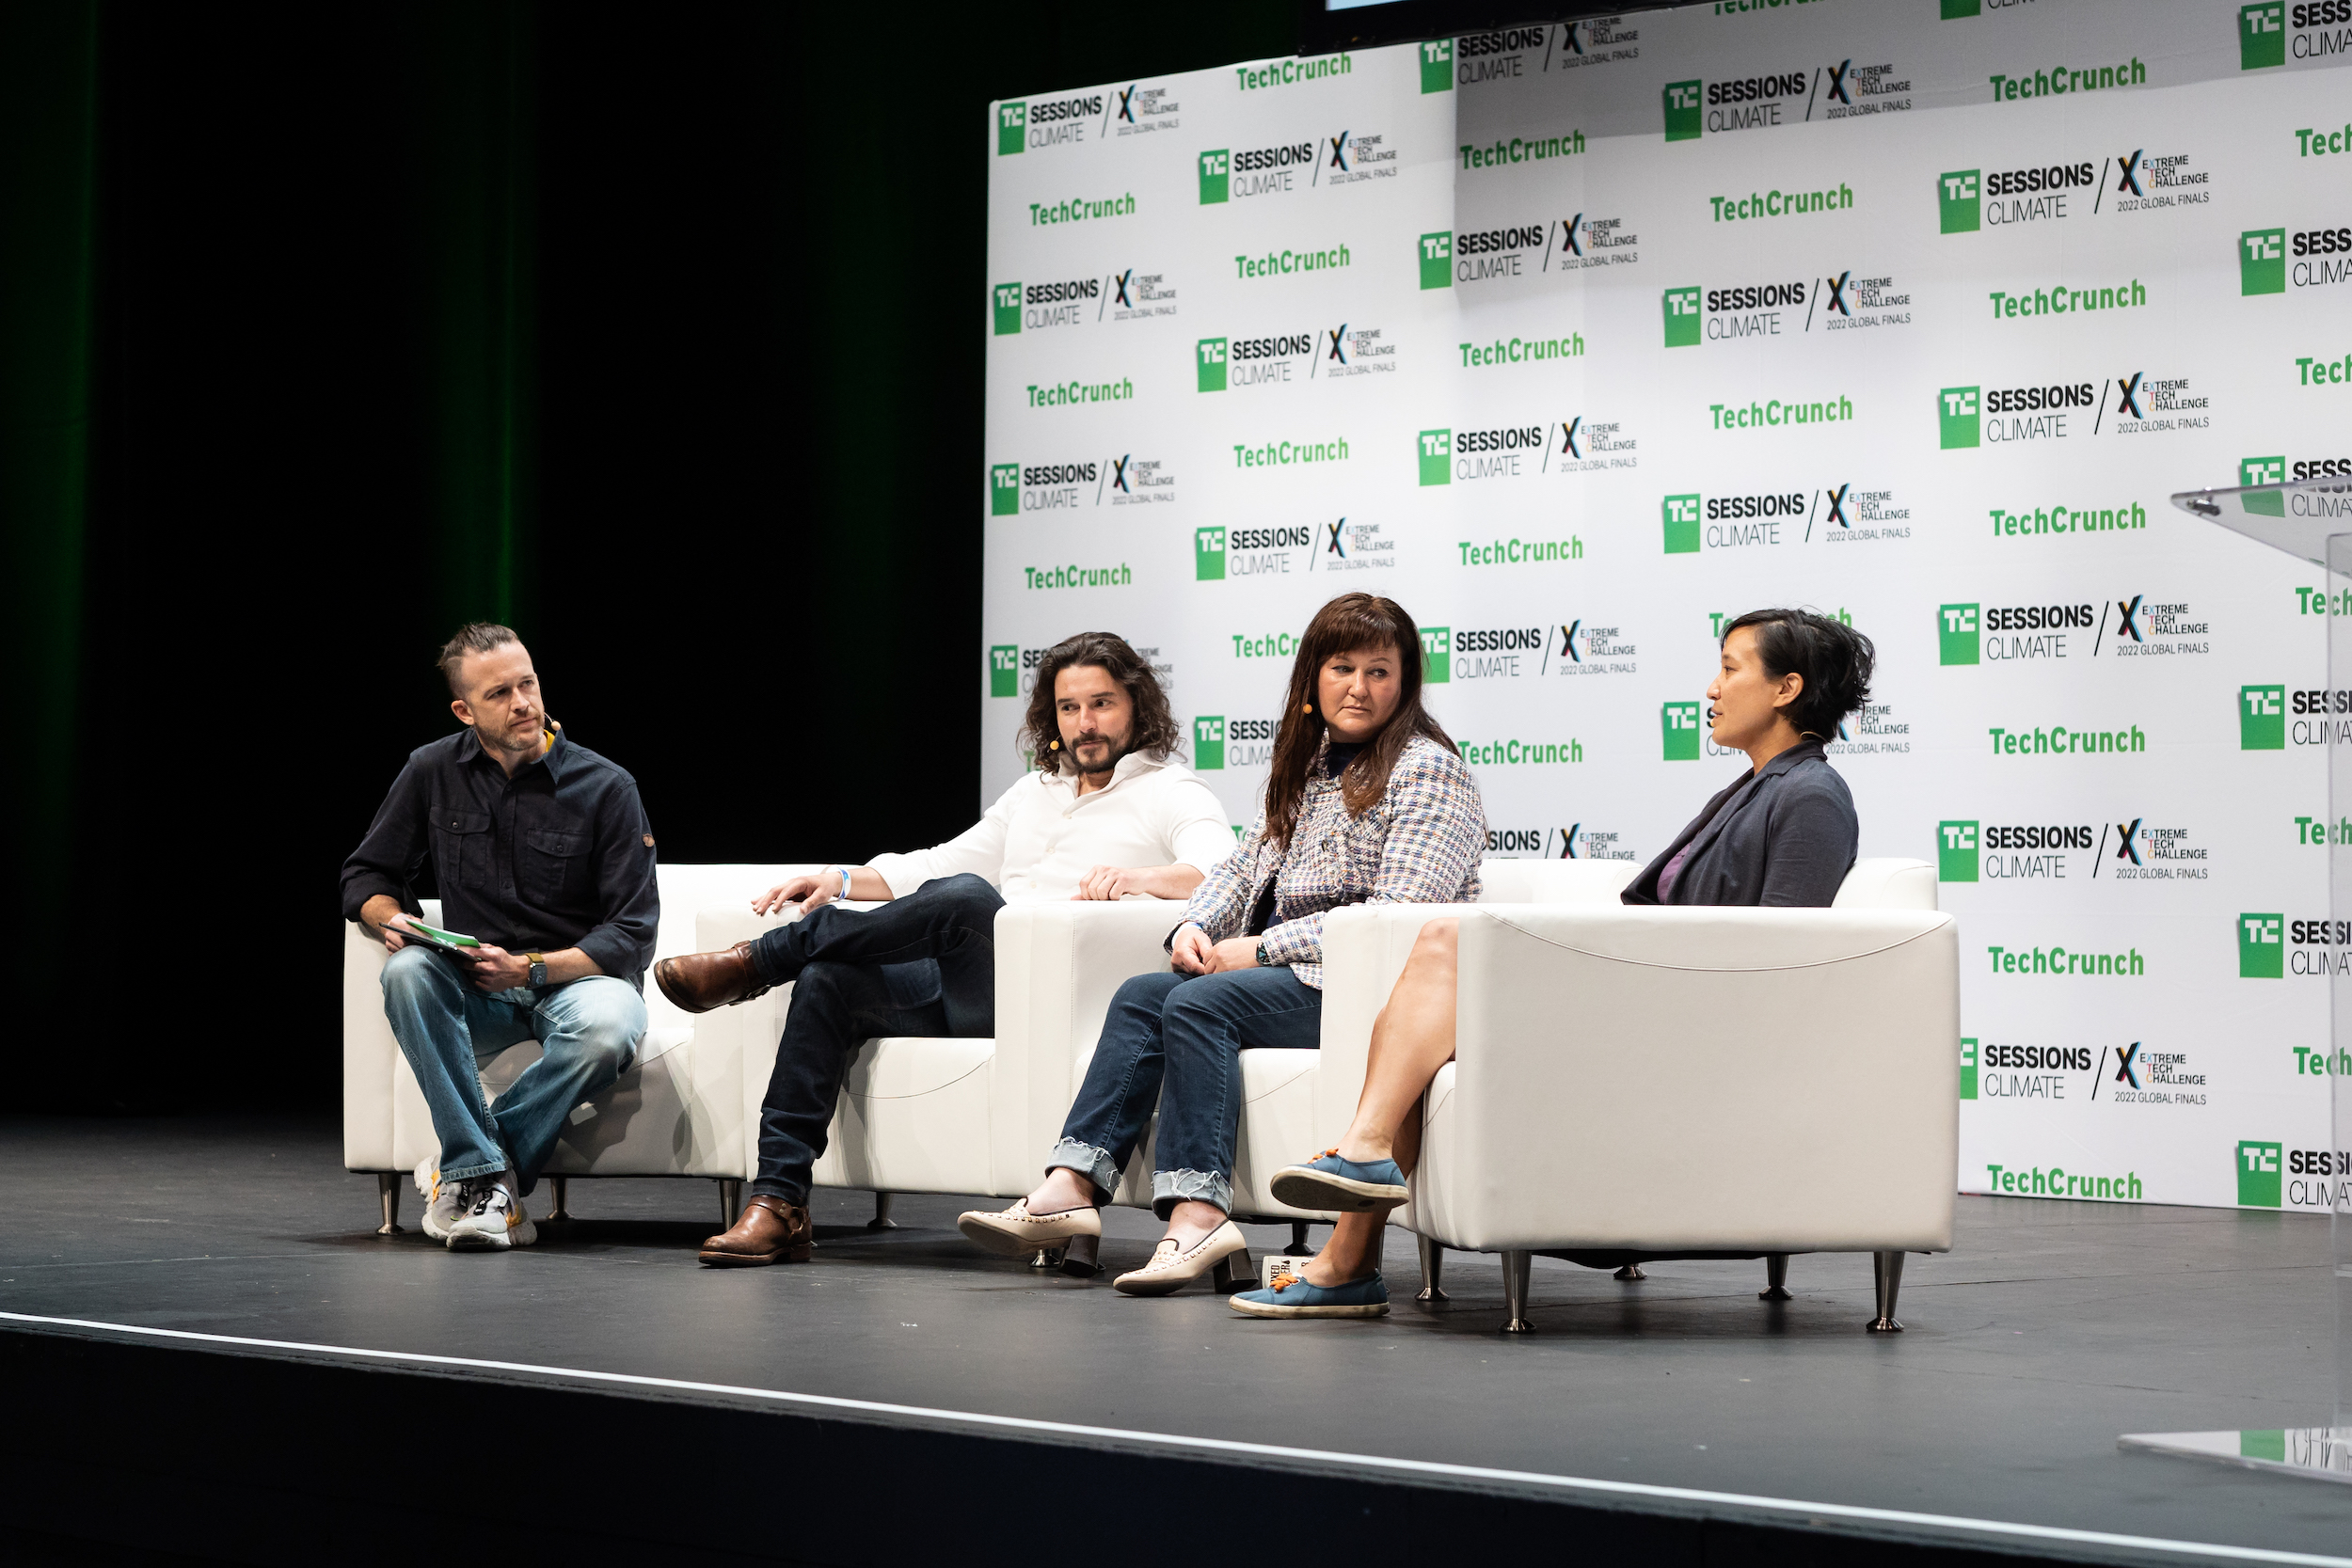 Tim De Chant interviews Christian Garcia, Kirsten Stead and Bae Wu at TC Sessions: Climate 2022